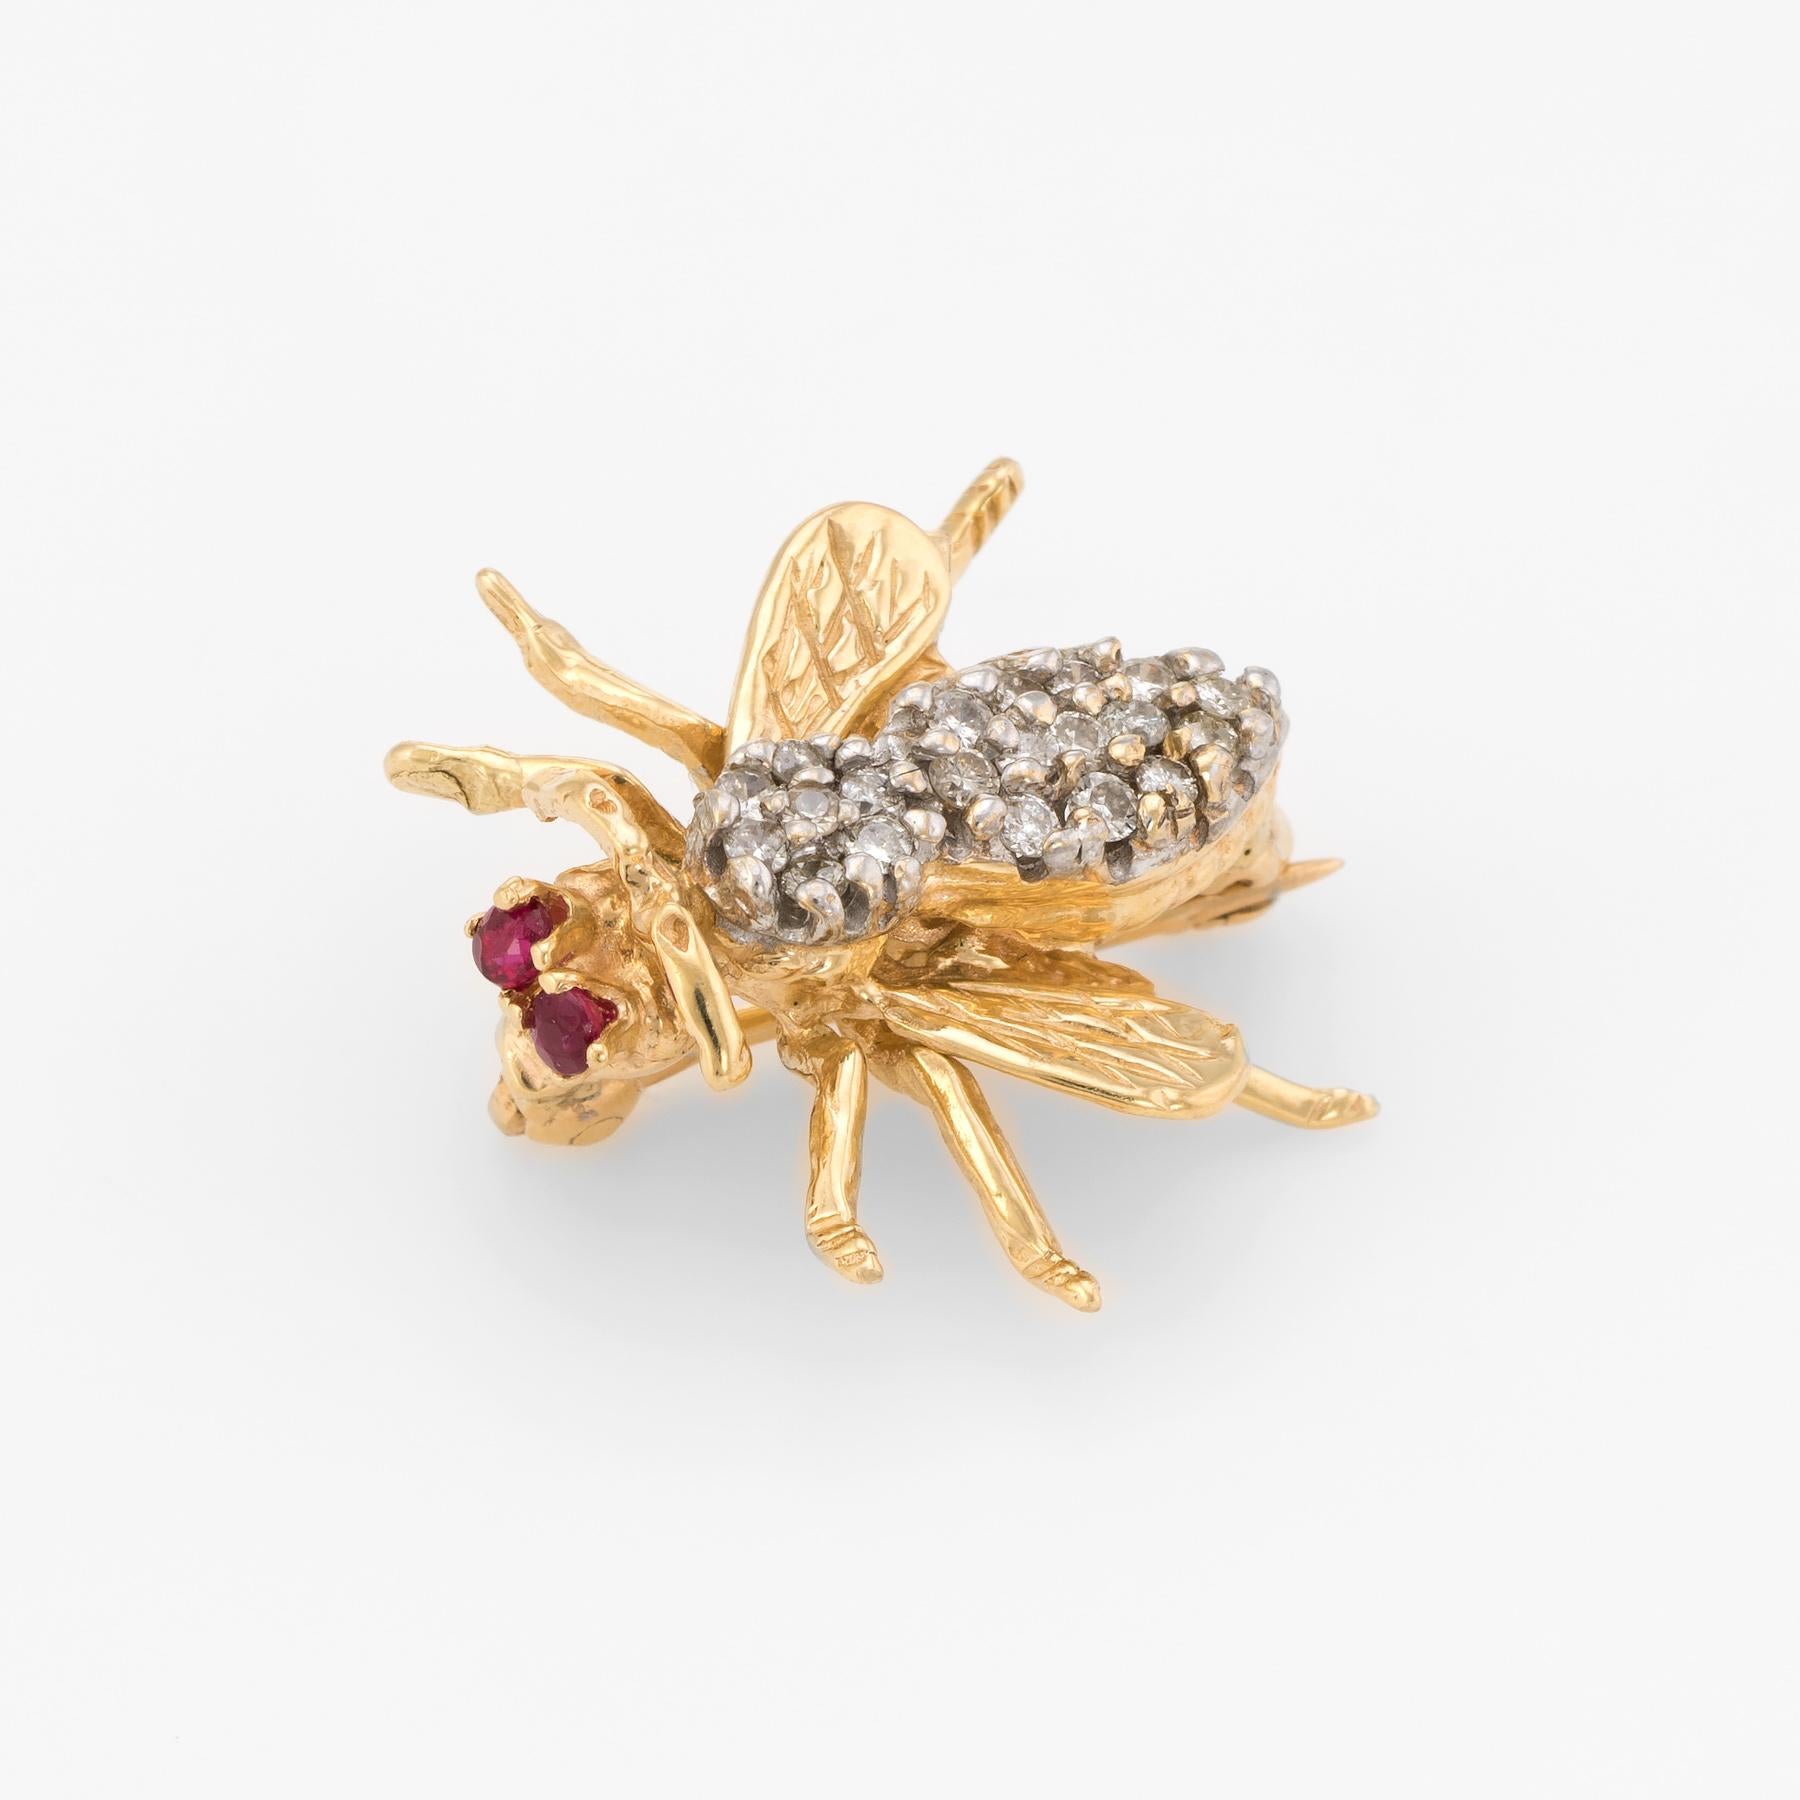 Charming bee brooch, crafted in 14 karat yellow gold. 

20 round brilliant cut diamonds total an estimated 0.15 carats (estimated at I color and I1 clarity). Two estimated 0.02 carat rubies are set into the eyes (0.04 carats total estimated weight).